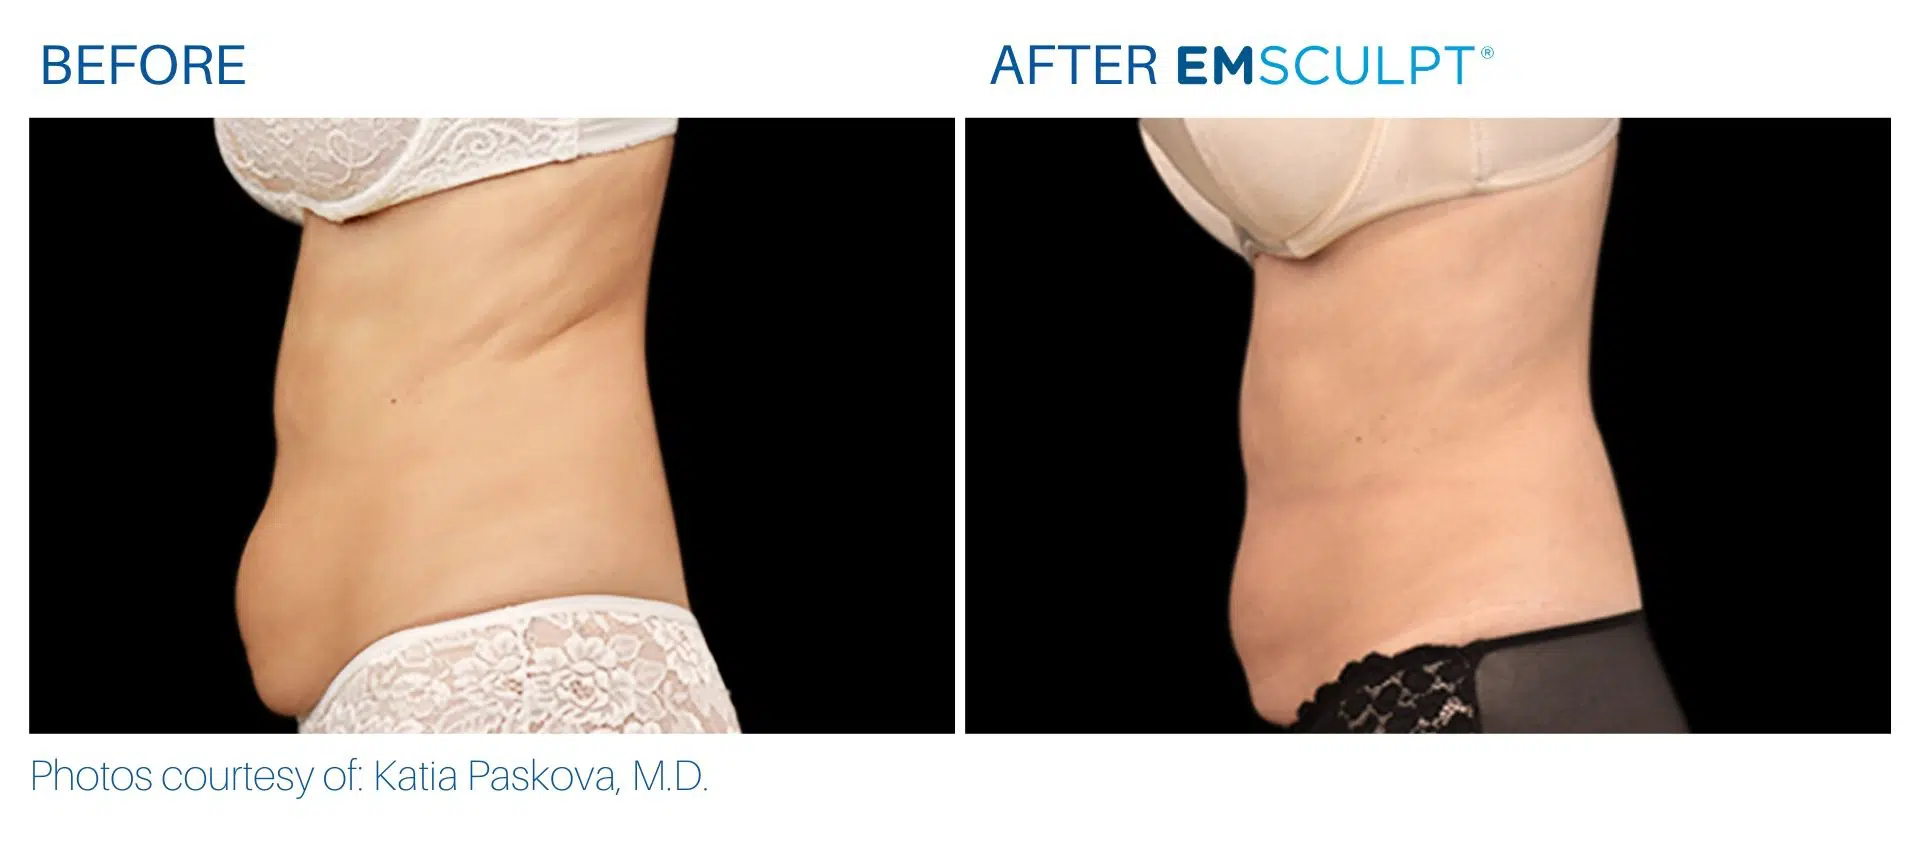 I Tried Emsculpt Neo — Here's My Before And After